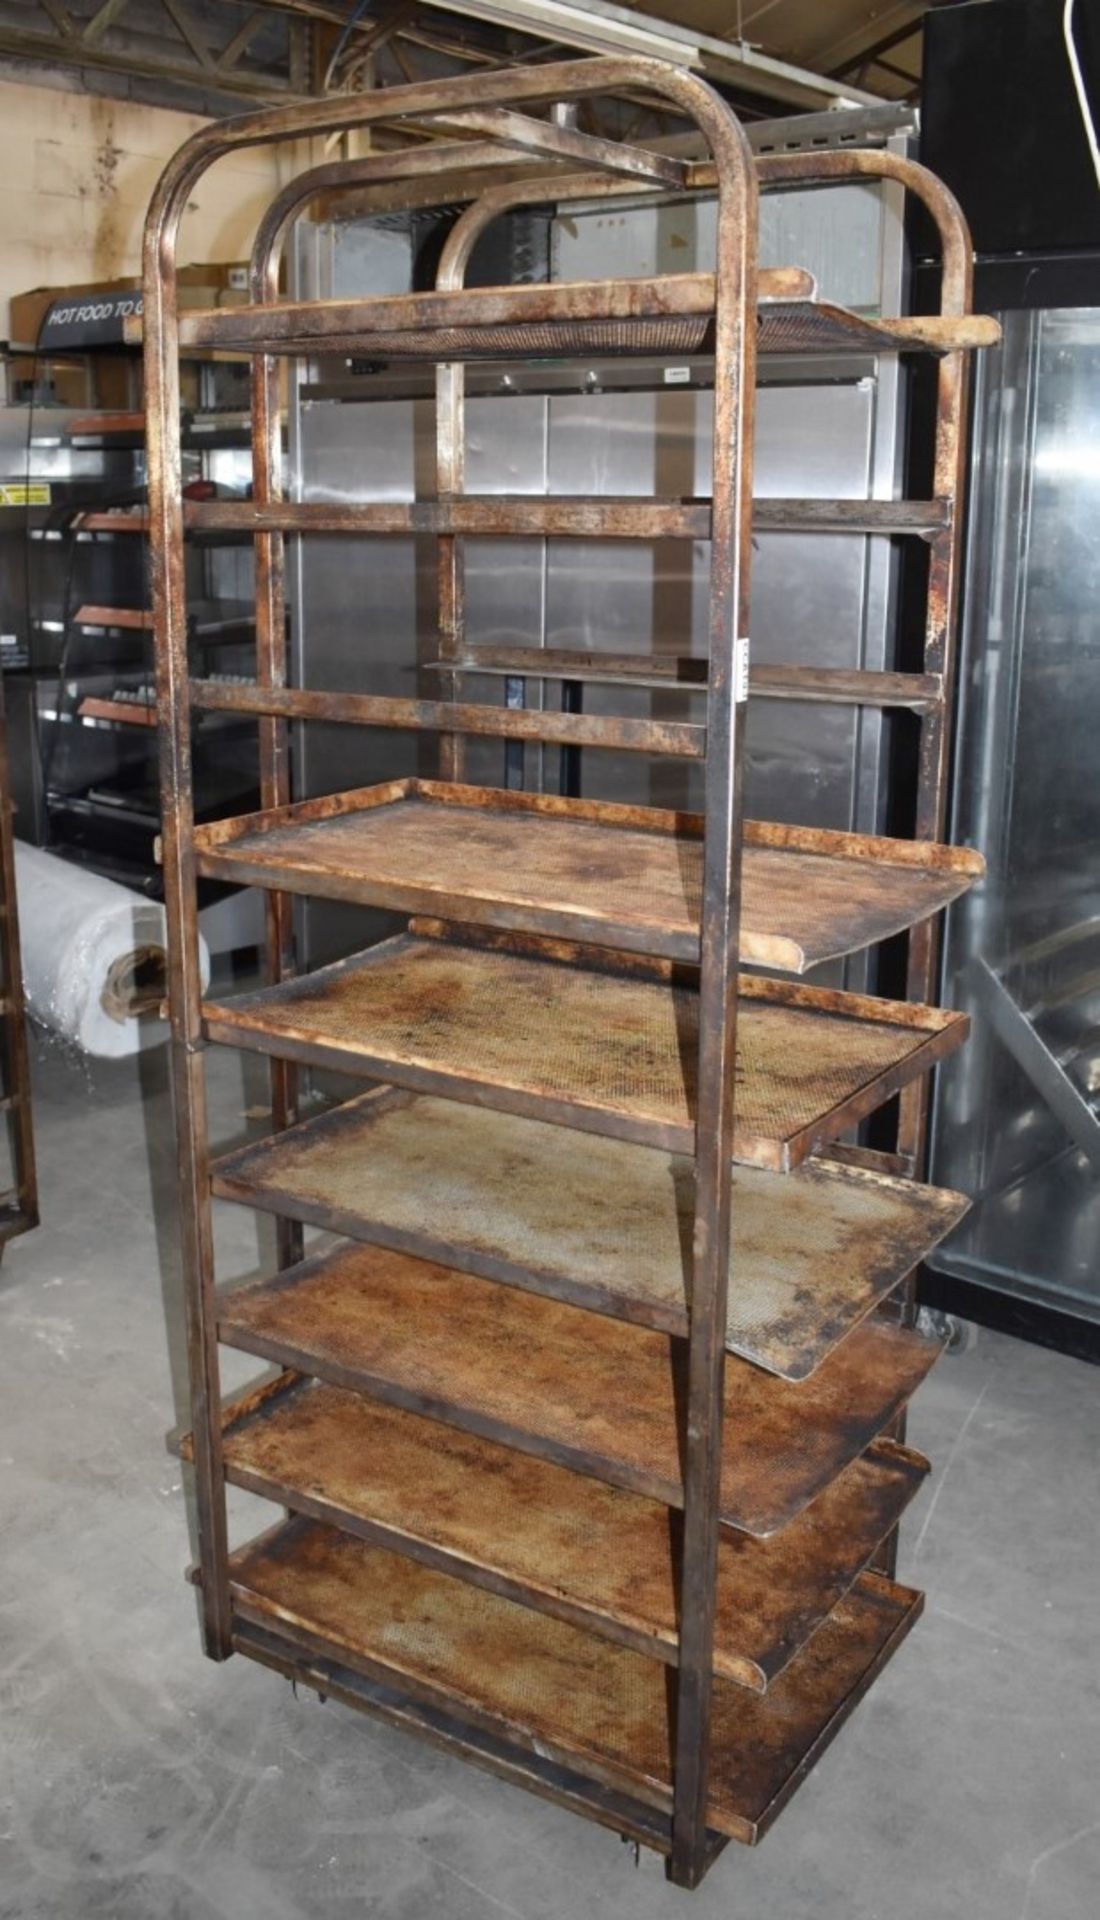 1 x Upright Mobile Baking Rack With Six Trays